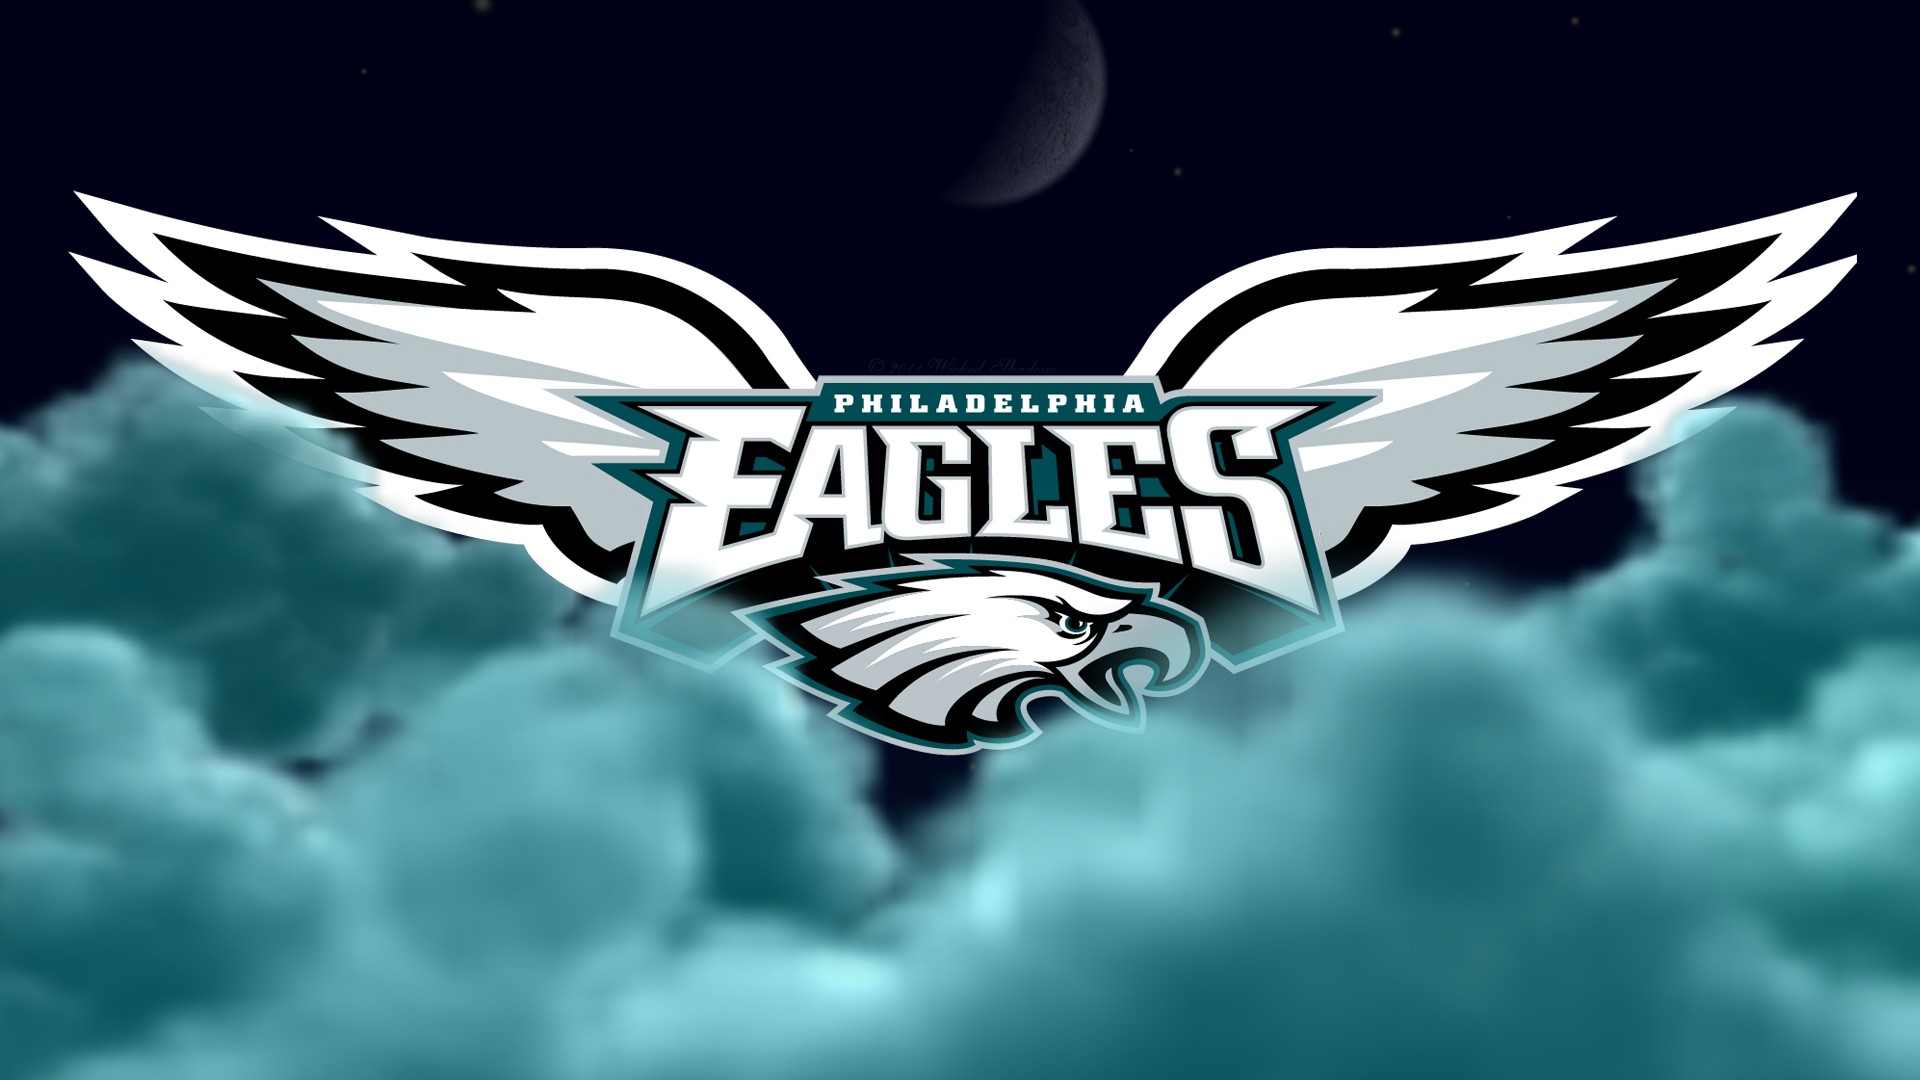 Philadelphia Eagles HD Wallpapers with resolution 1920x1080 pixel. You can make this wallpaper for your Mac or Windows Desktop Background, iPhone, Android or Tablet and another Smartphone device